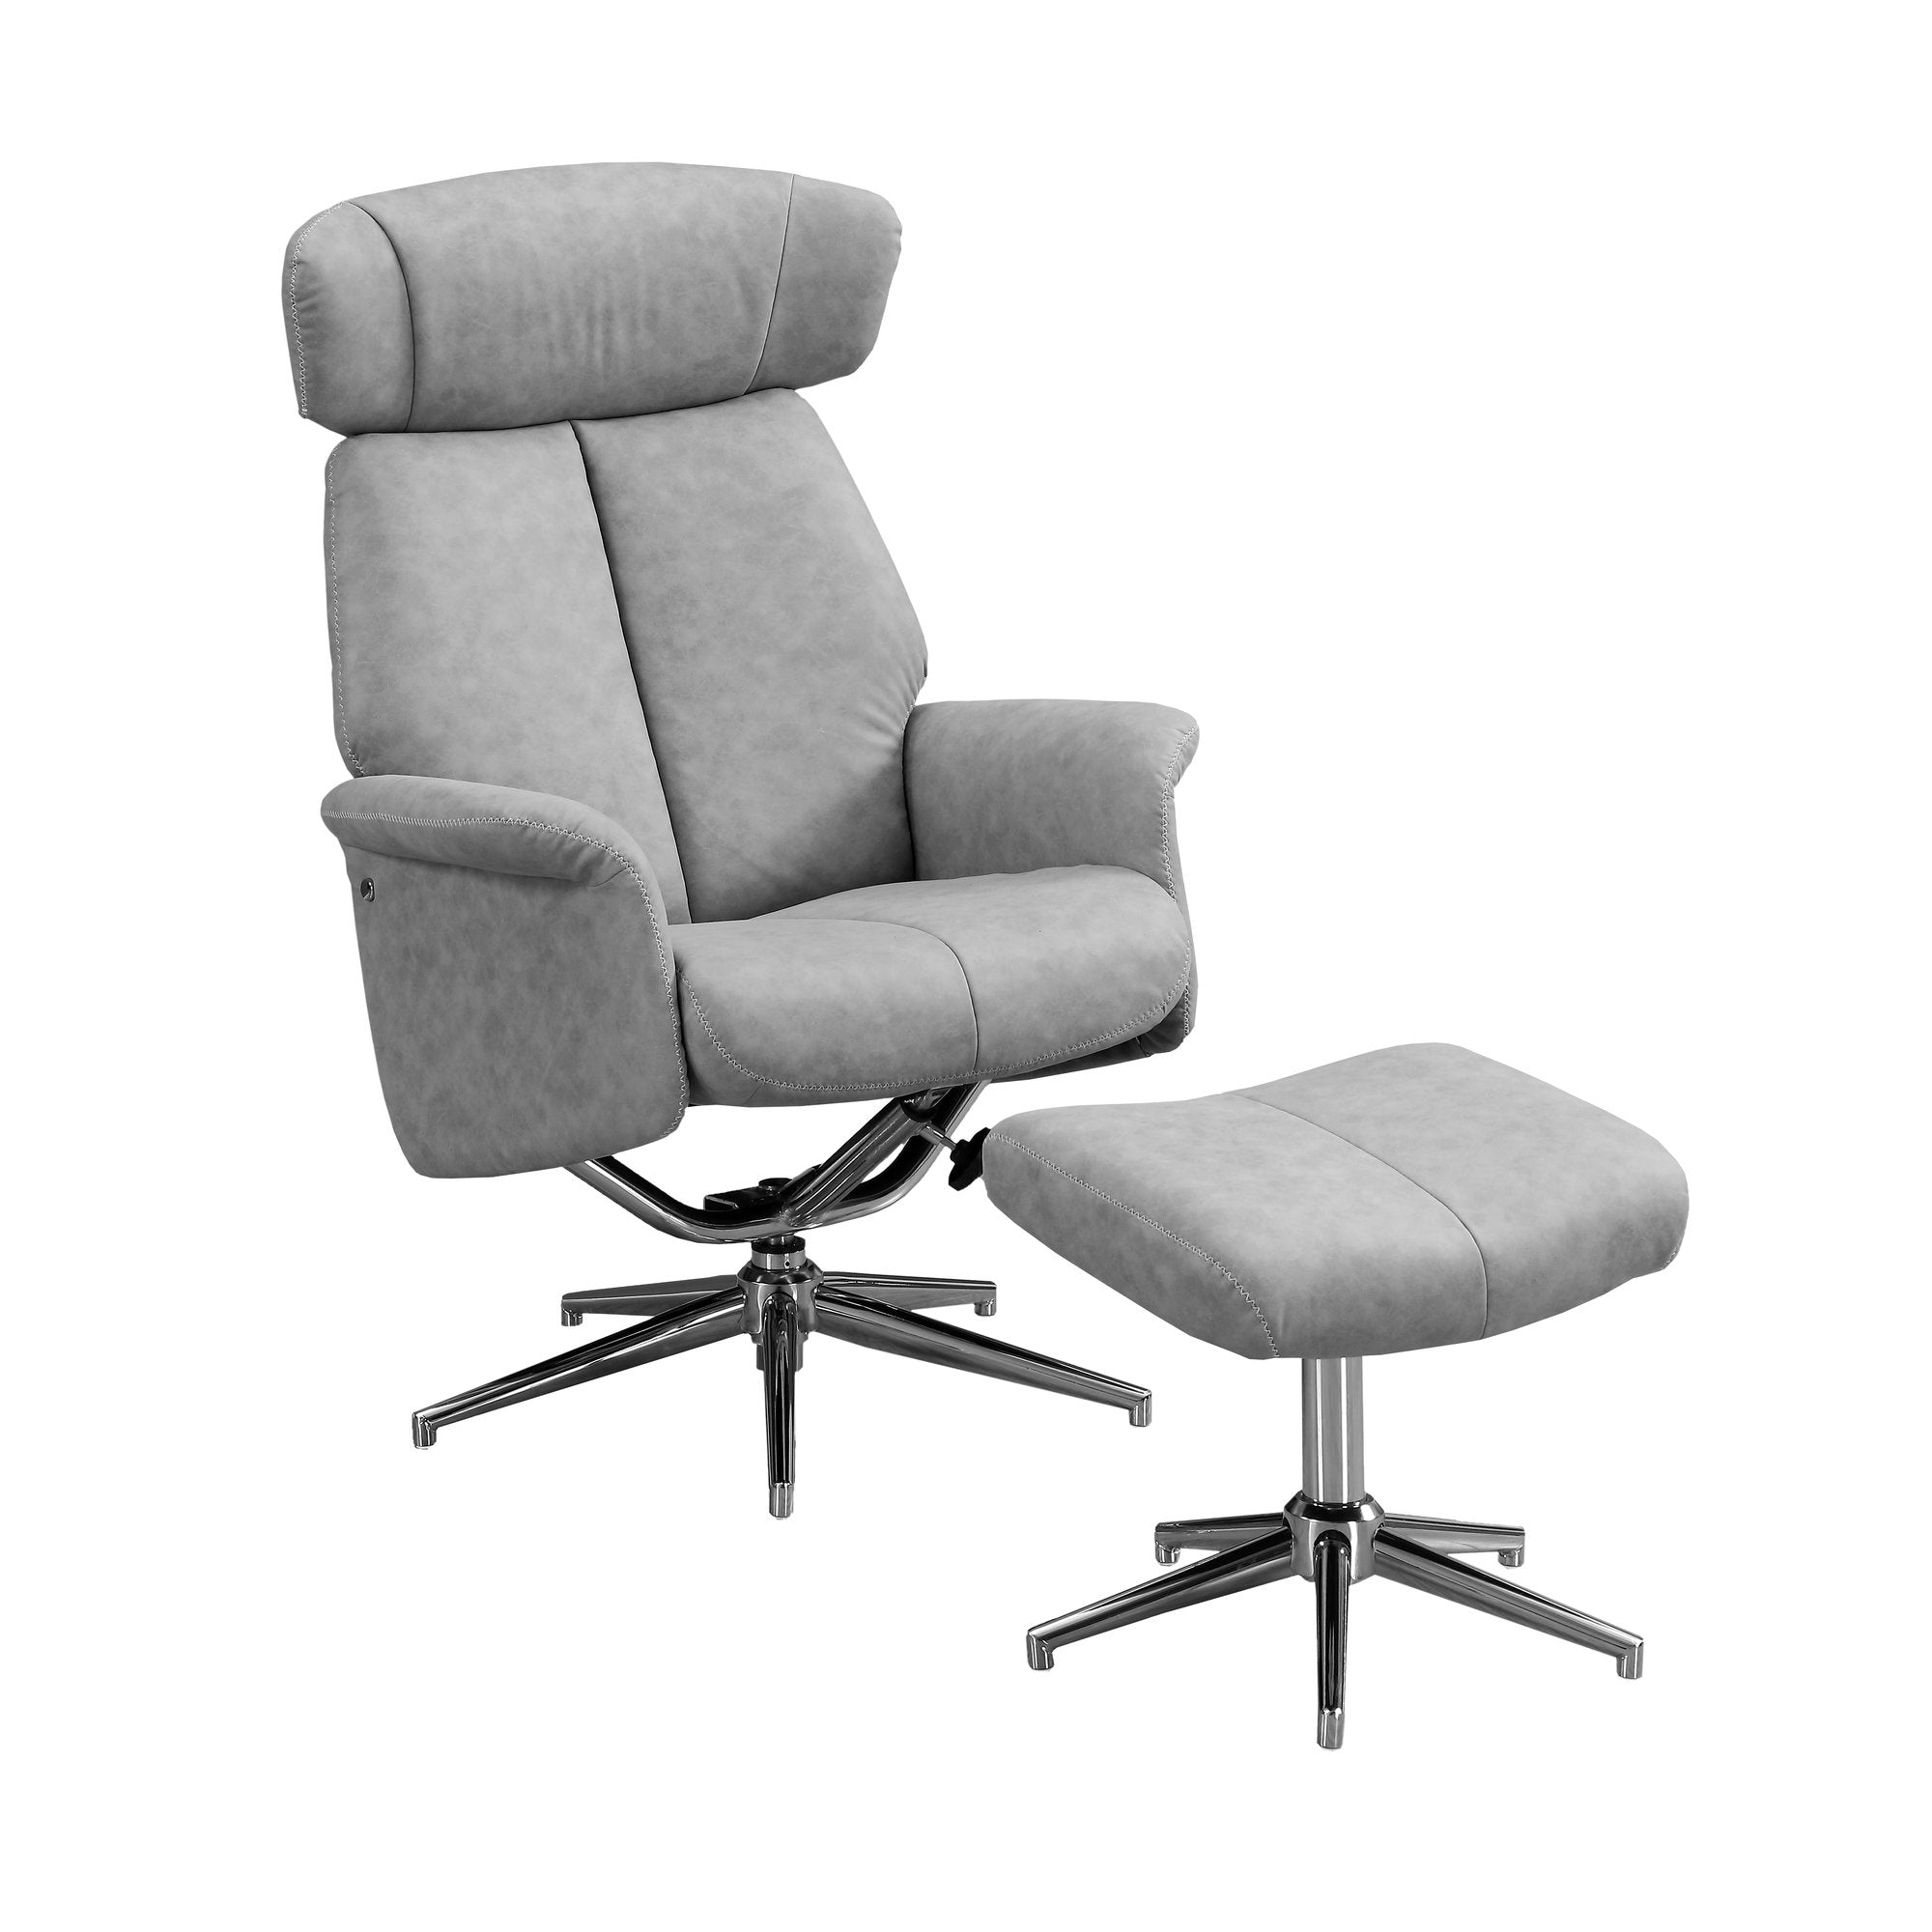 Gray Fabric Tufted Seat Swivel Adjustable Task Chair Fabric Back Steel Frame